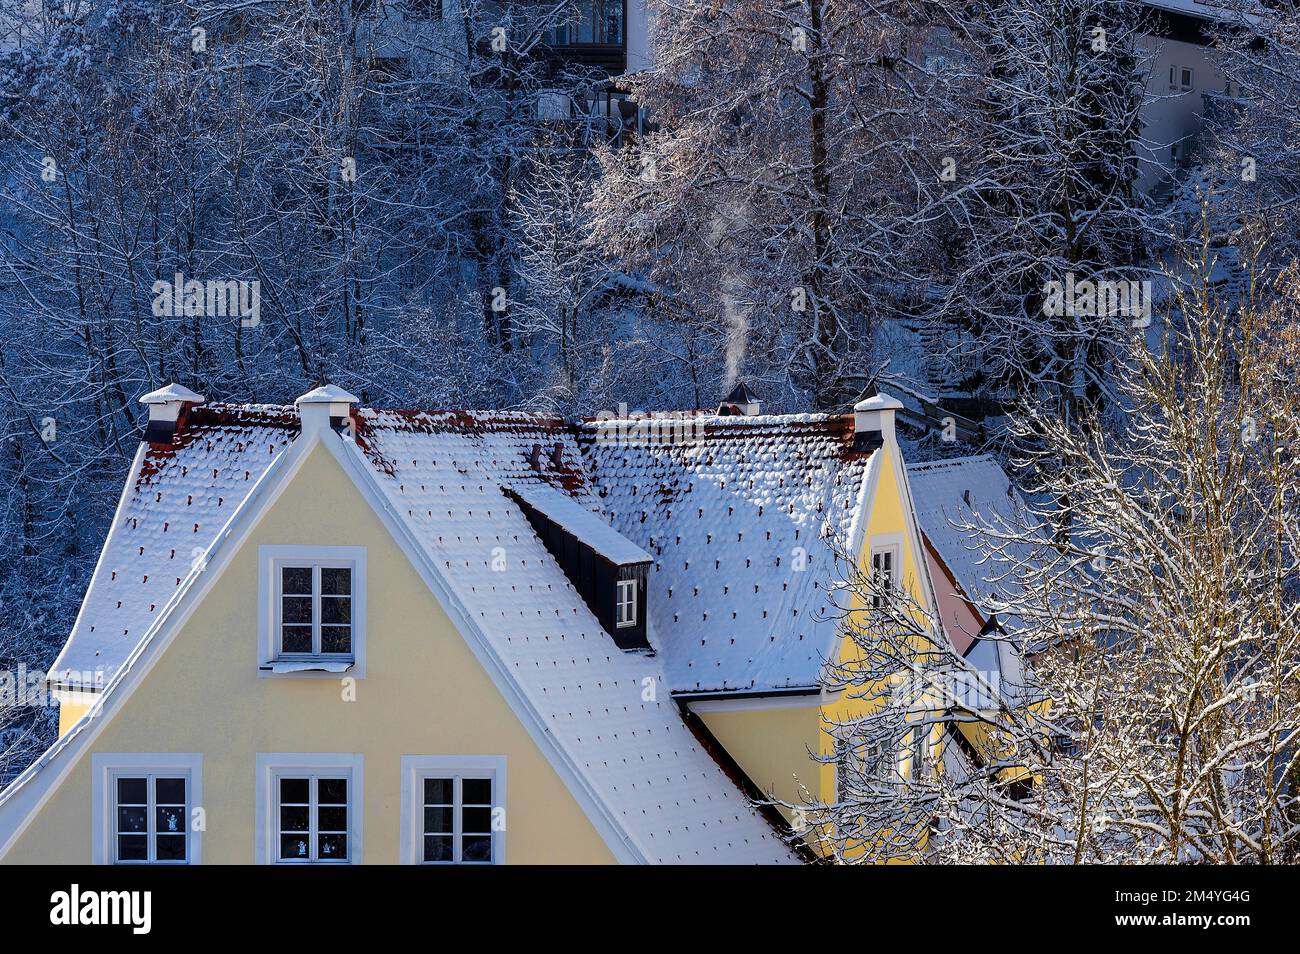 Snow-covered house roof with dormer window, Allgaeu, Bavaria, Germany Stock Photo